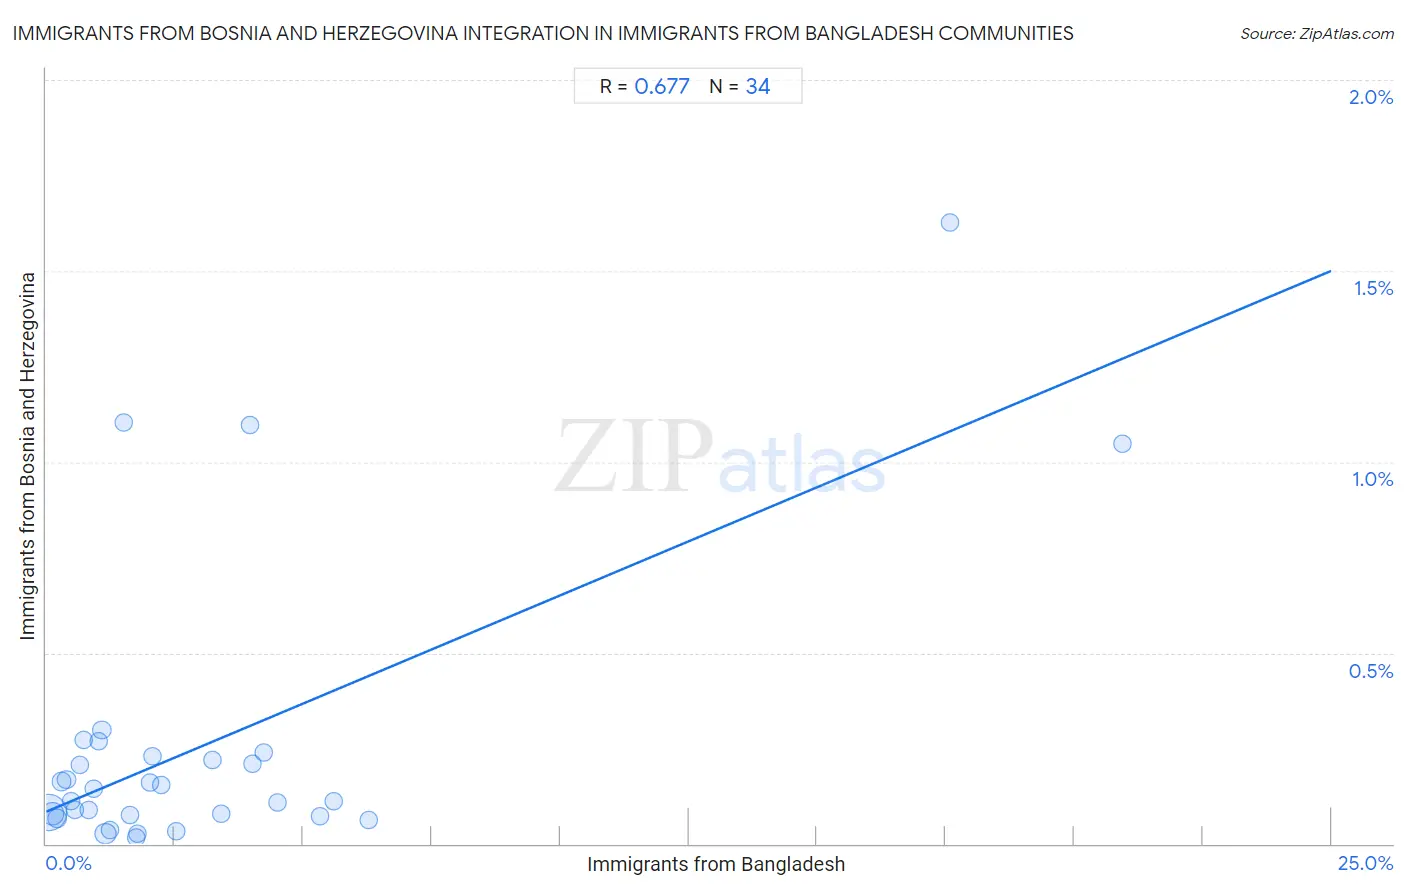 Immigrants from Bangladesh Integration in Immigrants from Bosnia and Herzegovina Communities